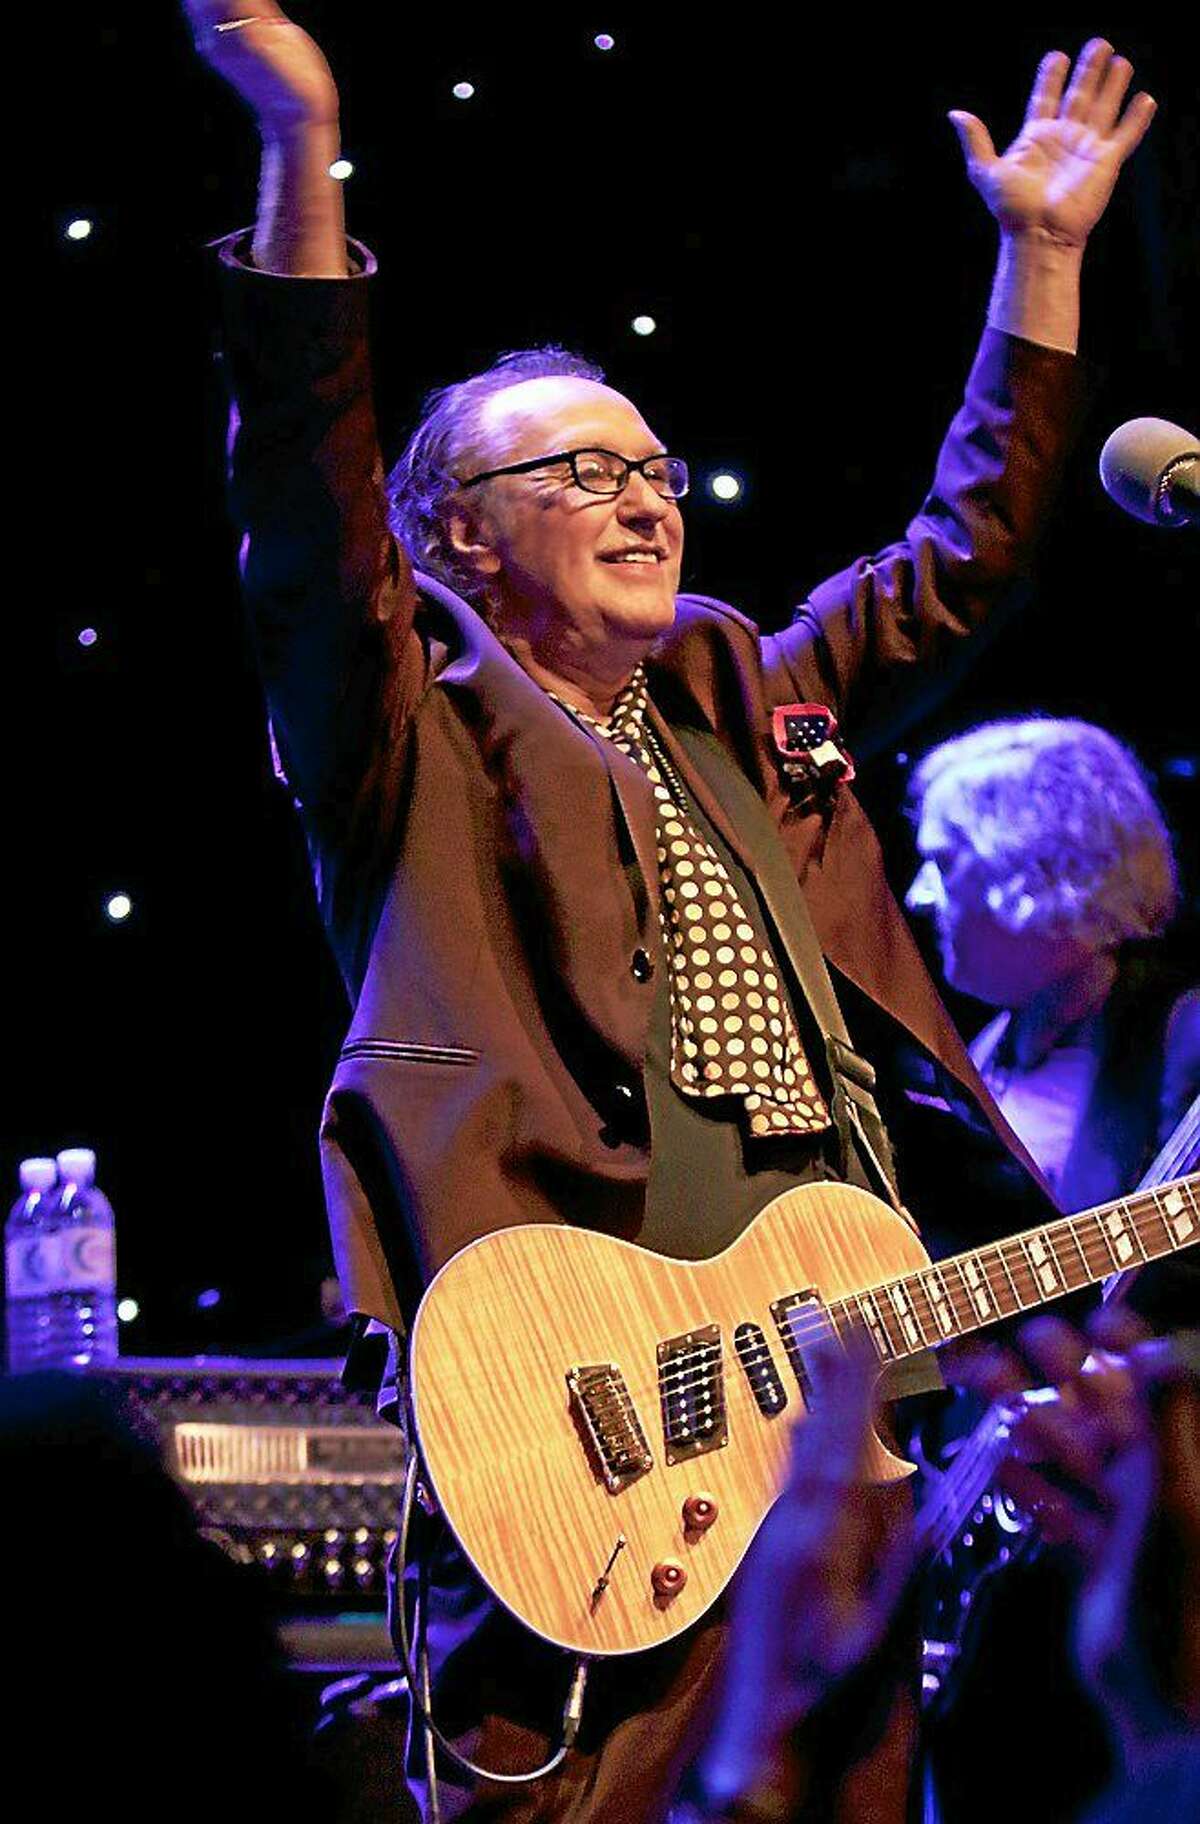 Photo by John Atashian The Kinks lead guitarist Dave Davies is shown performing on stage at the Infinity Hall in Norfolk during his sold out concert appearance on November 20th. He also performed the following night (11/21) at Infinity Hall Hartford. In 2003, Davies was ranked 91st in Rolling Stone magazineís list of the ì100 Greatest Guitarist of All Timeî.